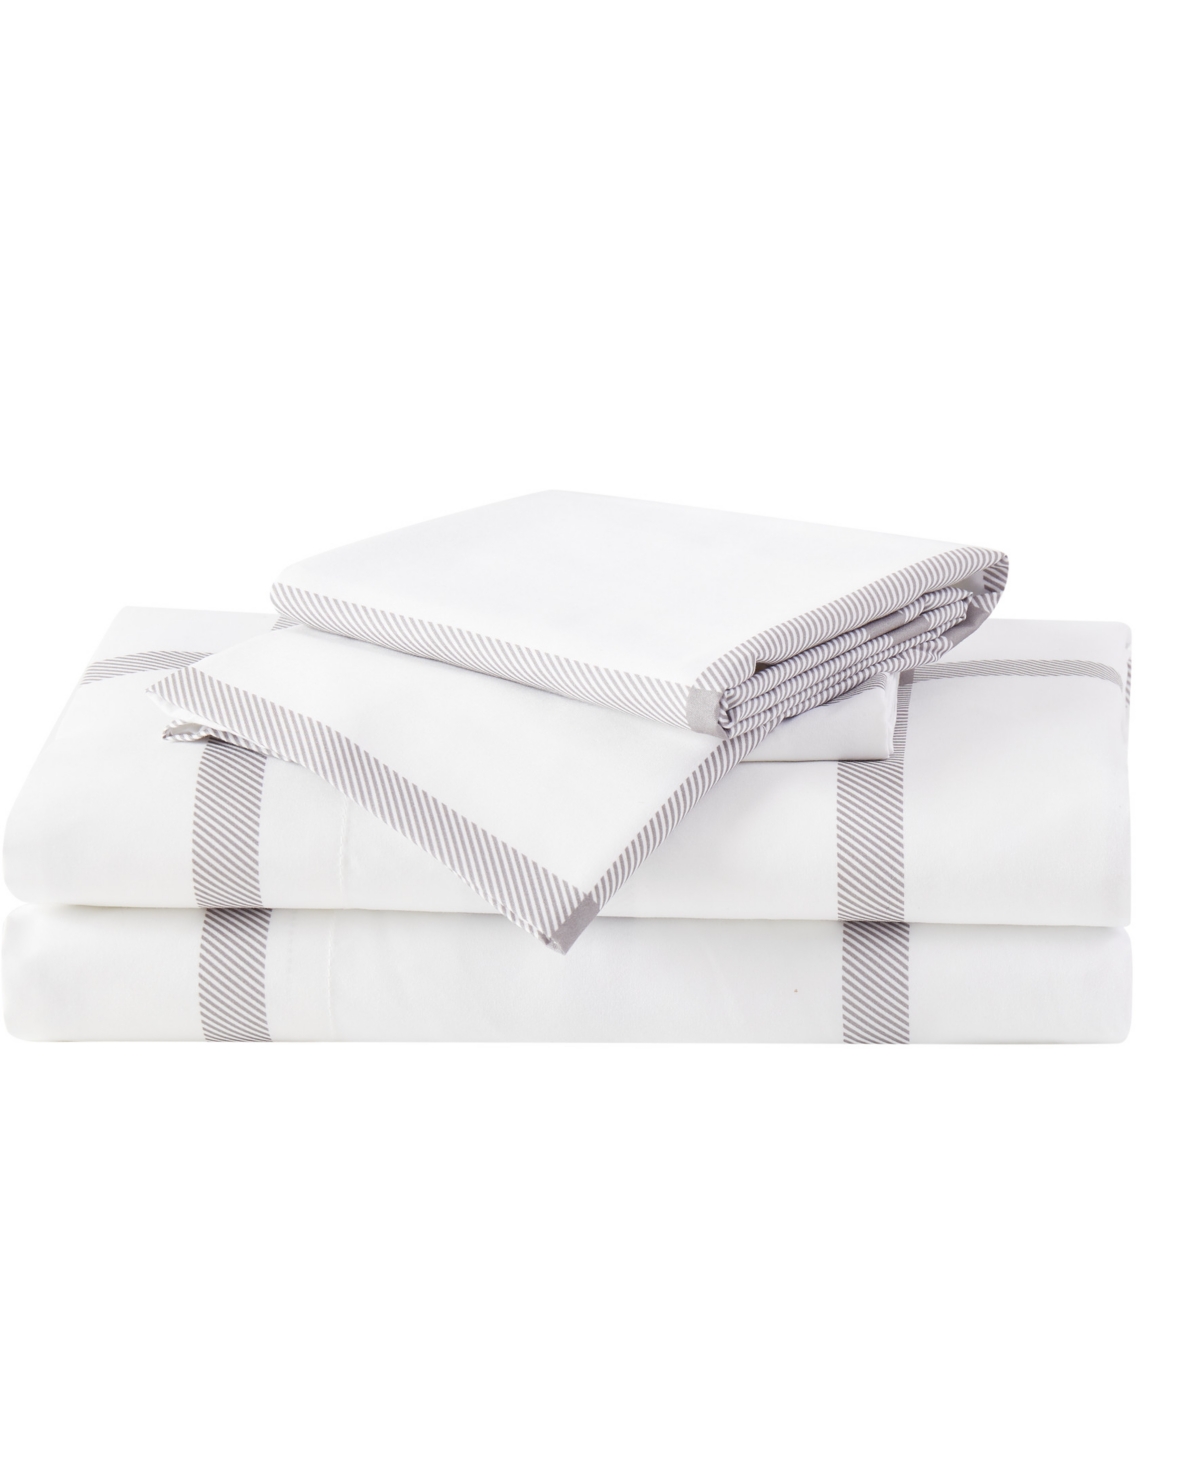 Truly Soft Queen 4 Pc Sheet Set In Windowpane White,grey